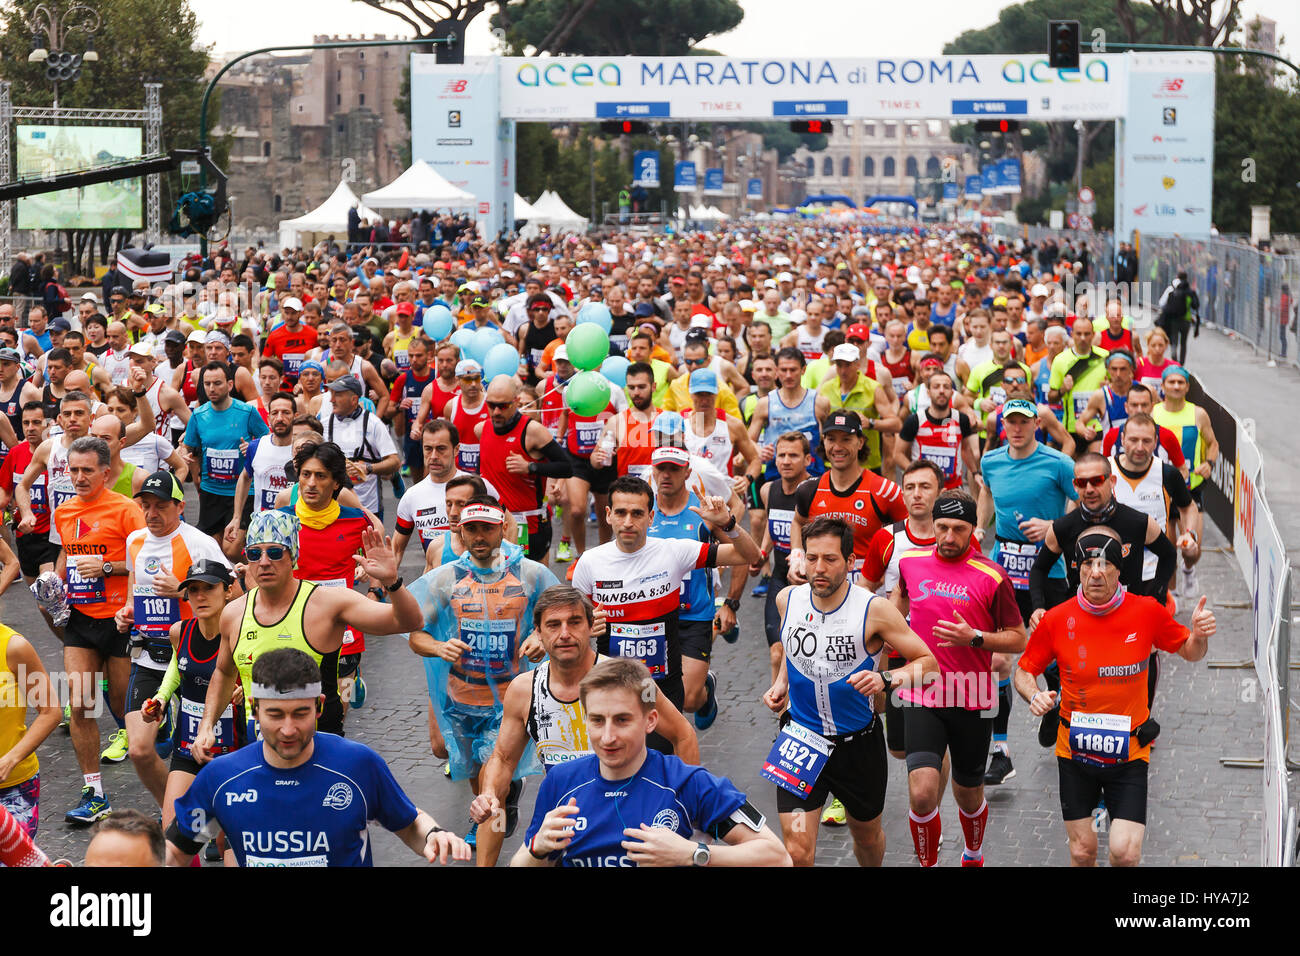 Rome, Italy. 02nd Apr, 2017. Rome, Italy - April 2, 2017: the departure of the athletes on Via dei Fori Imperiali, the Coliseum on background. Credit: Polifoto/Alamy Live News Stock Photo